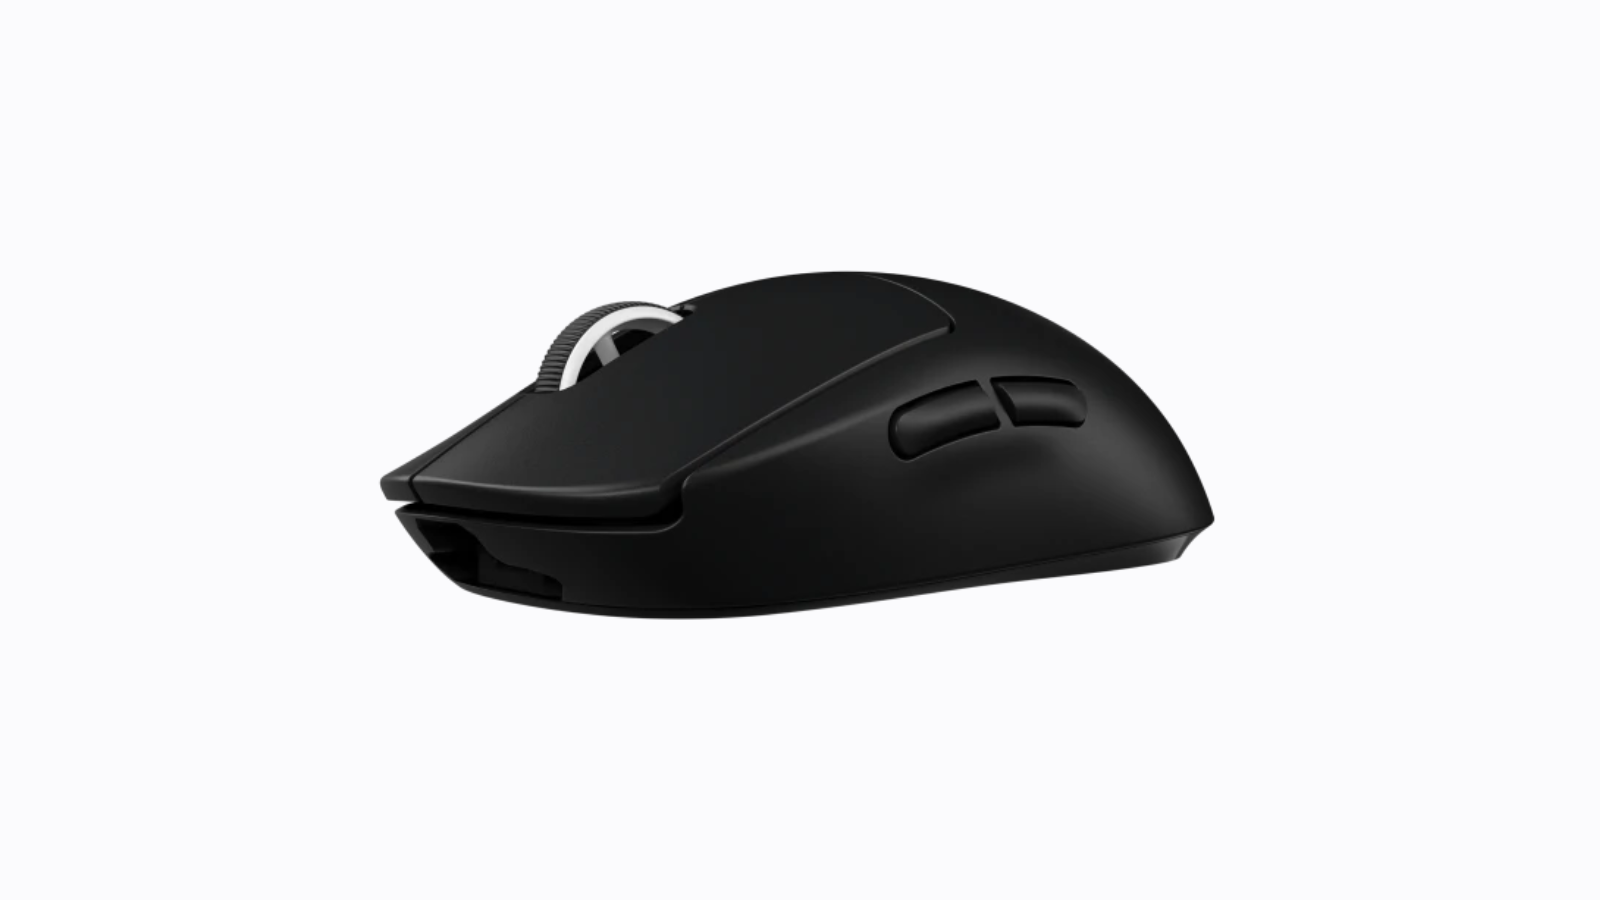 Logitech G Pro Wireless Gaming Mouse Reviews, Pros and Cons